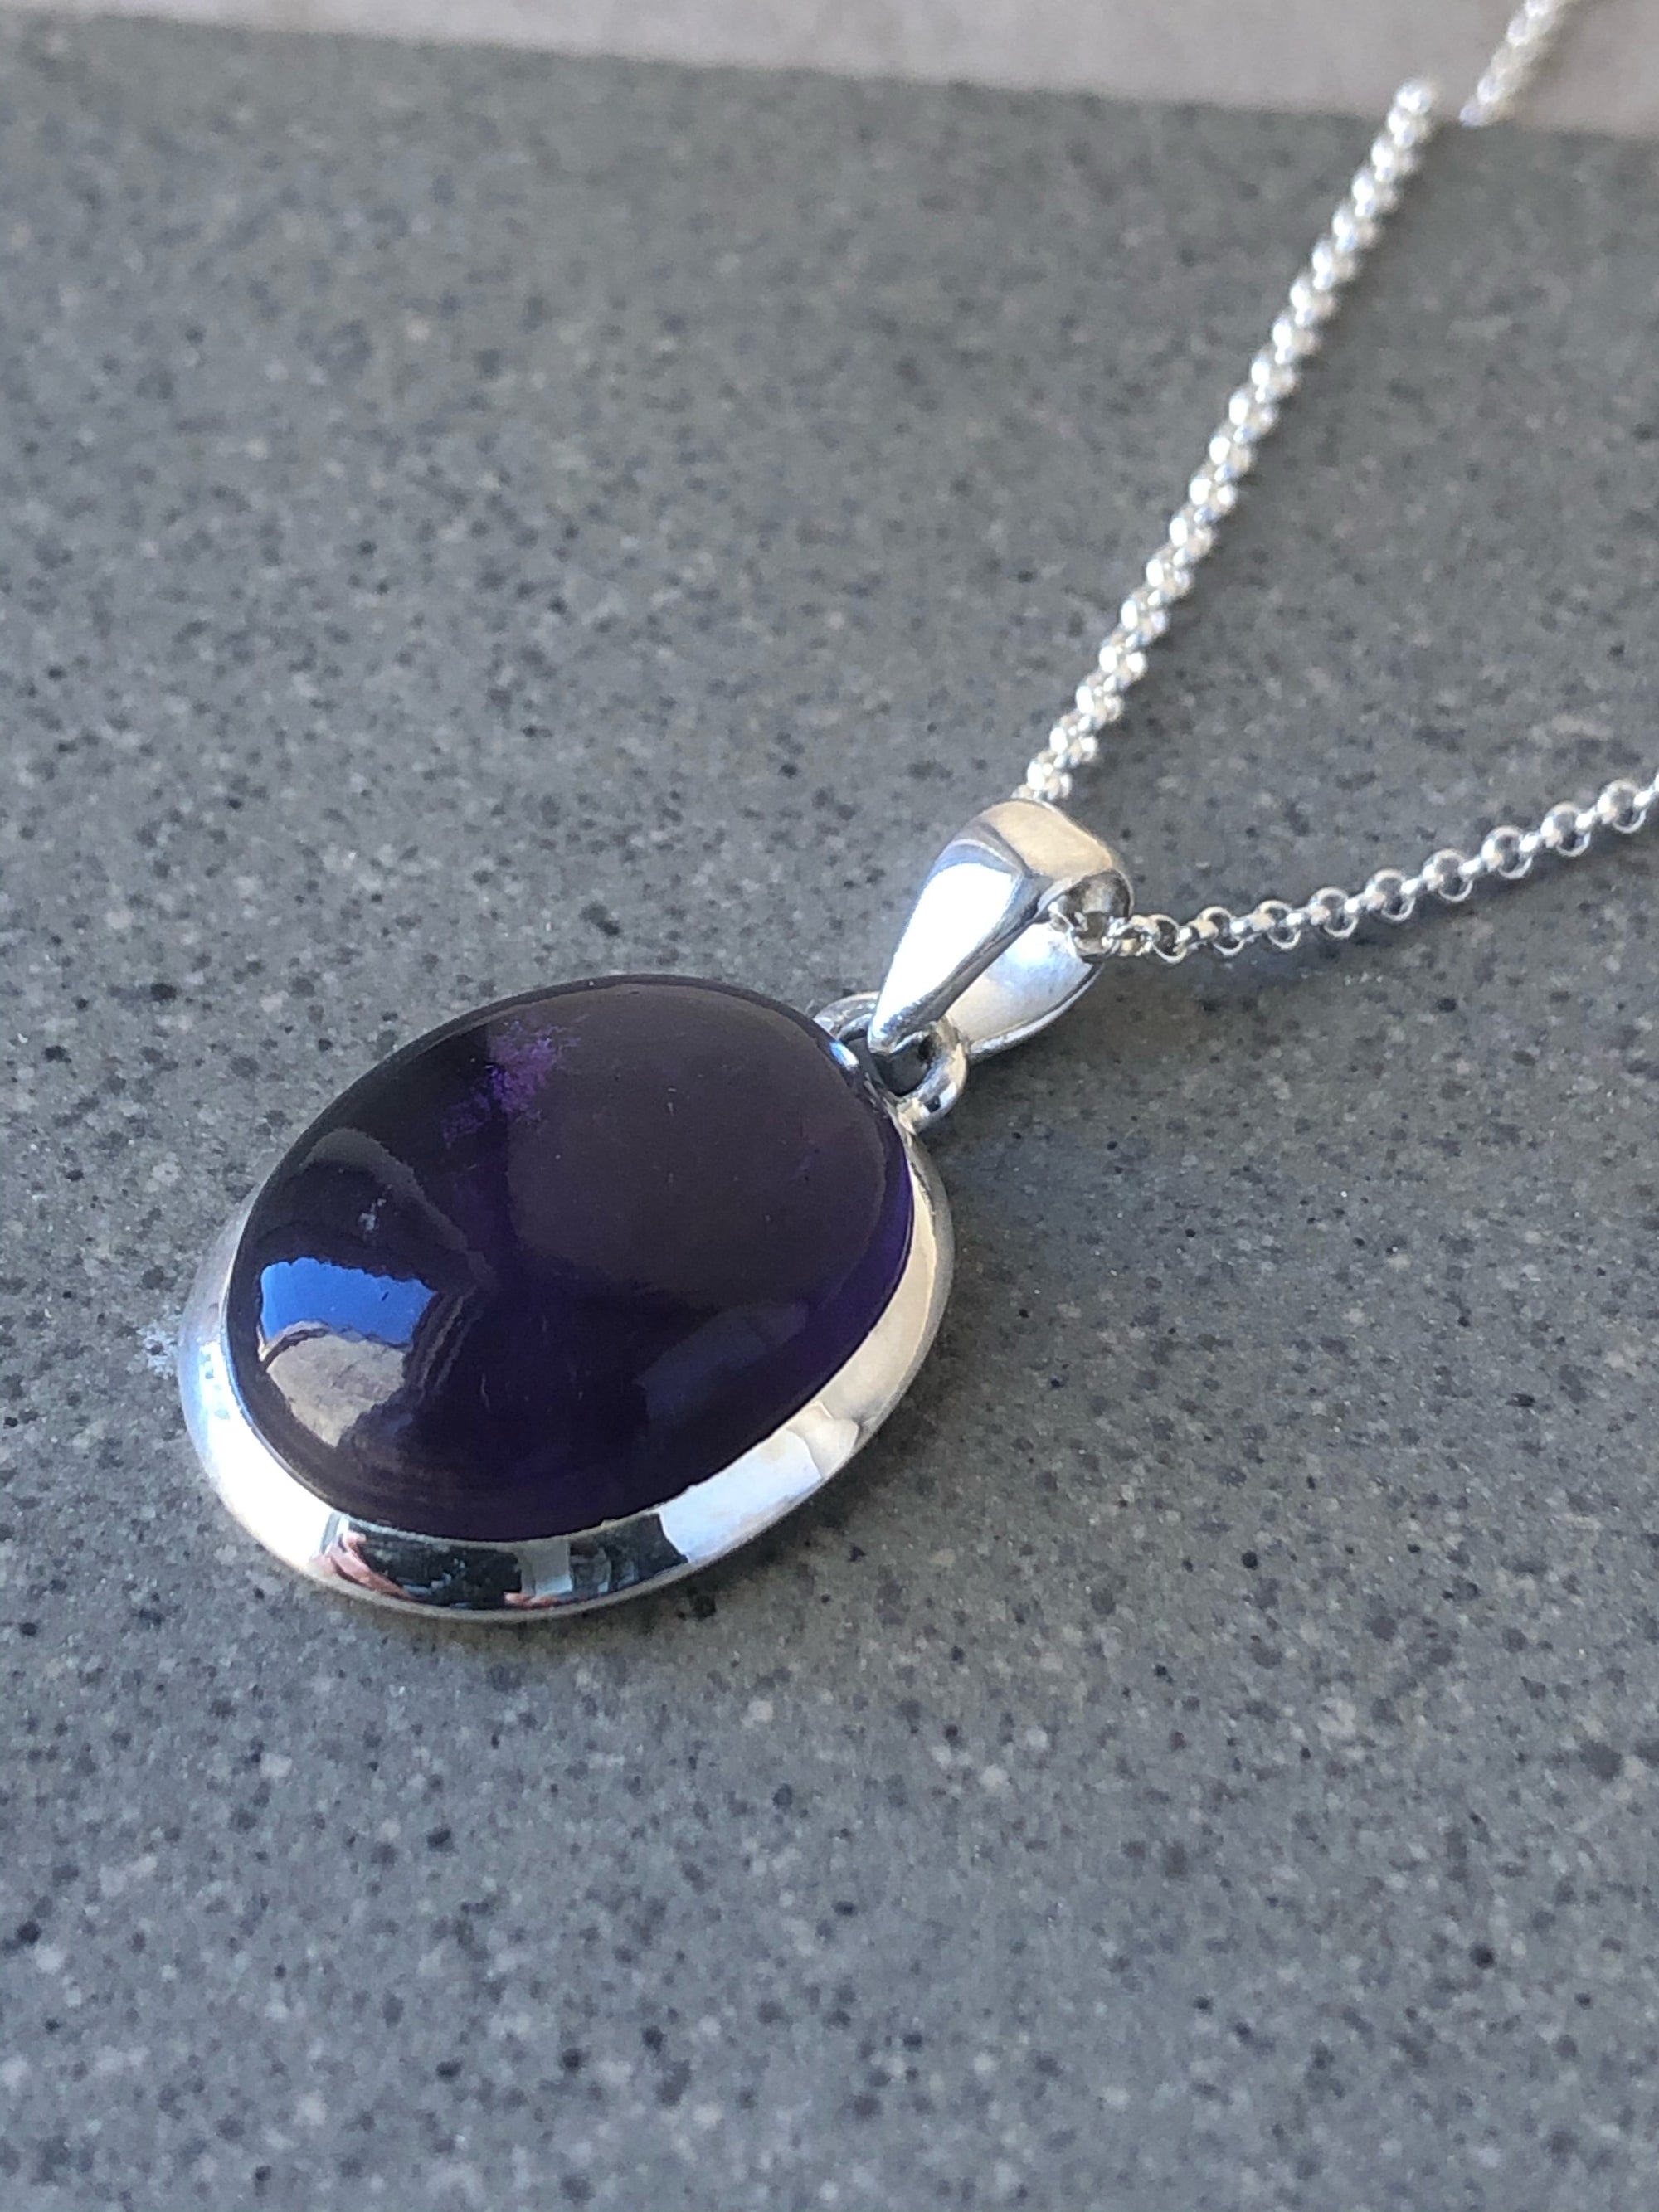 Small Amethyst Sterling Silver Pendant Necklace